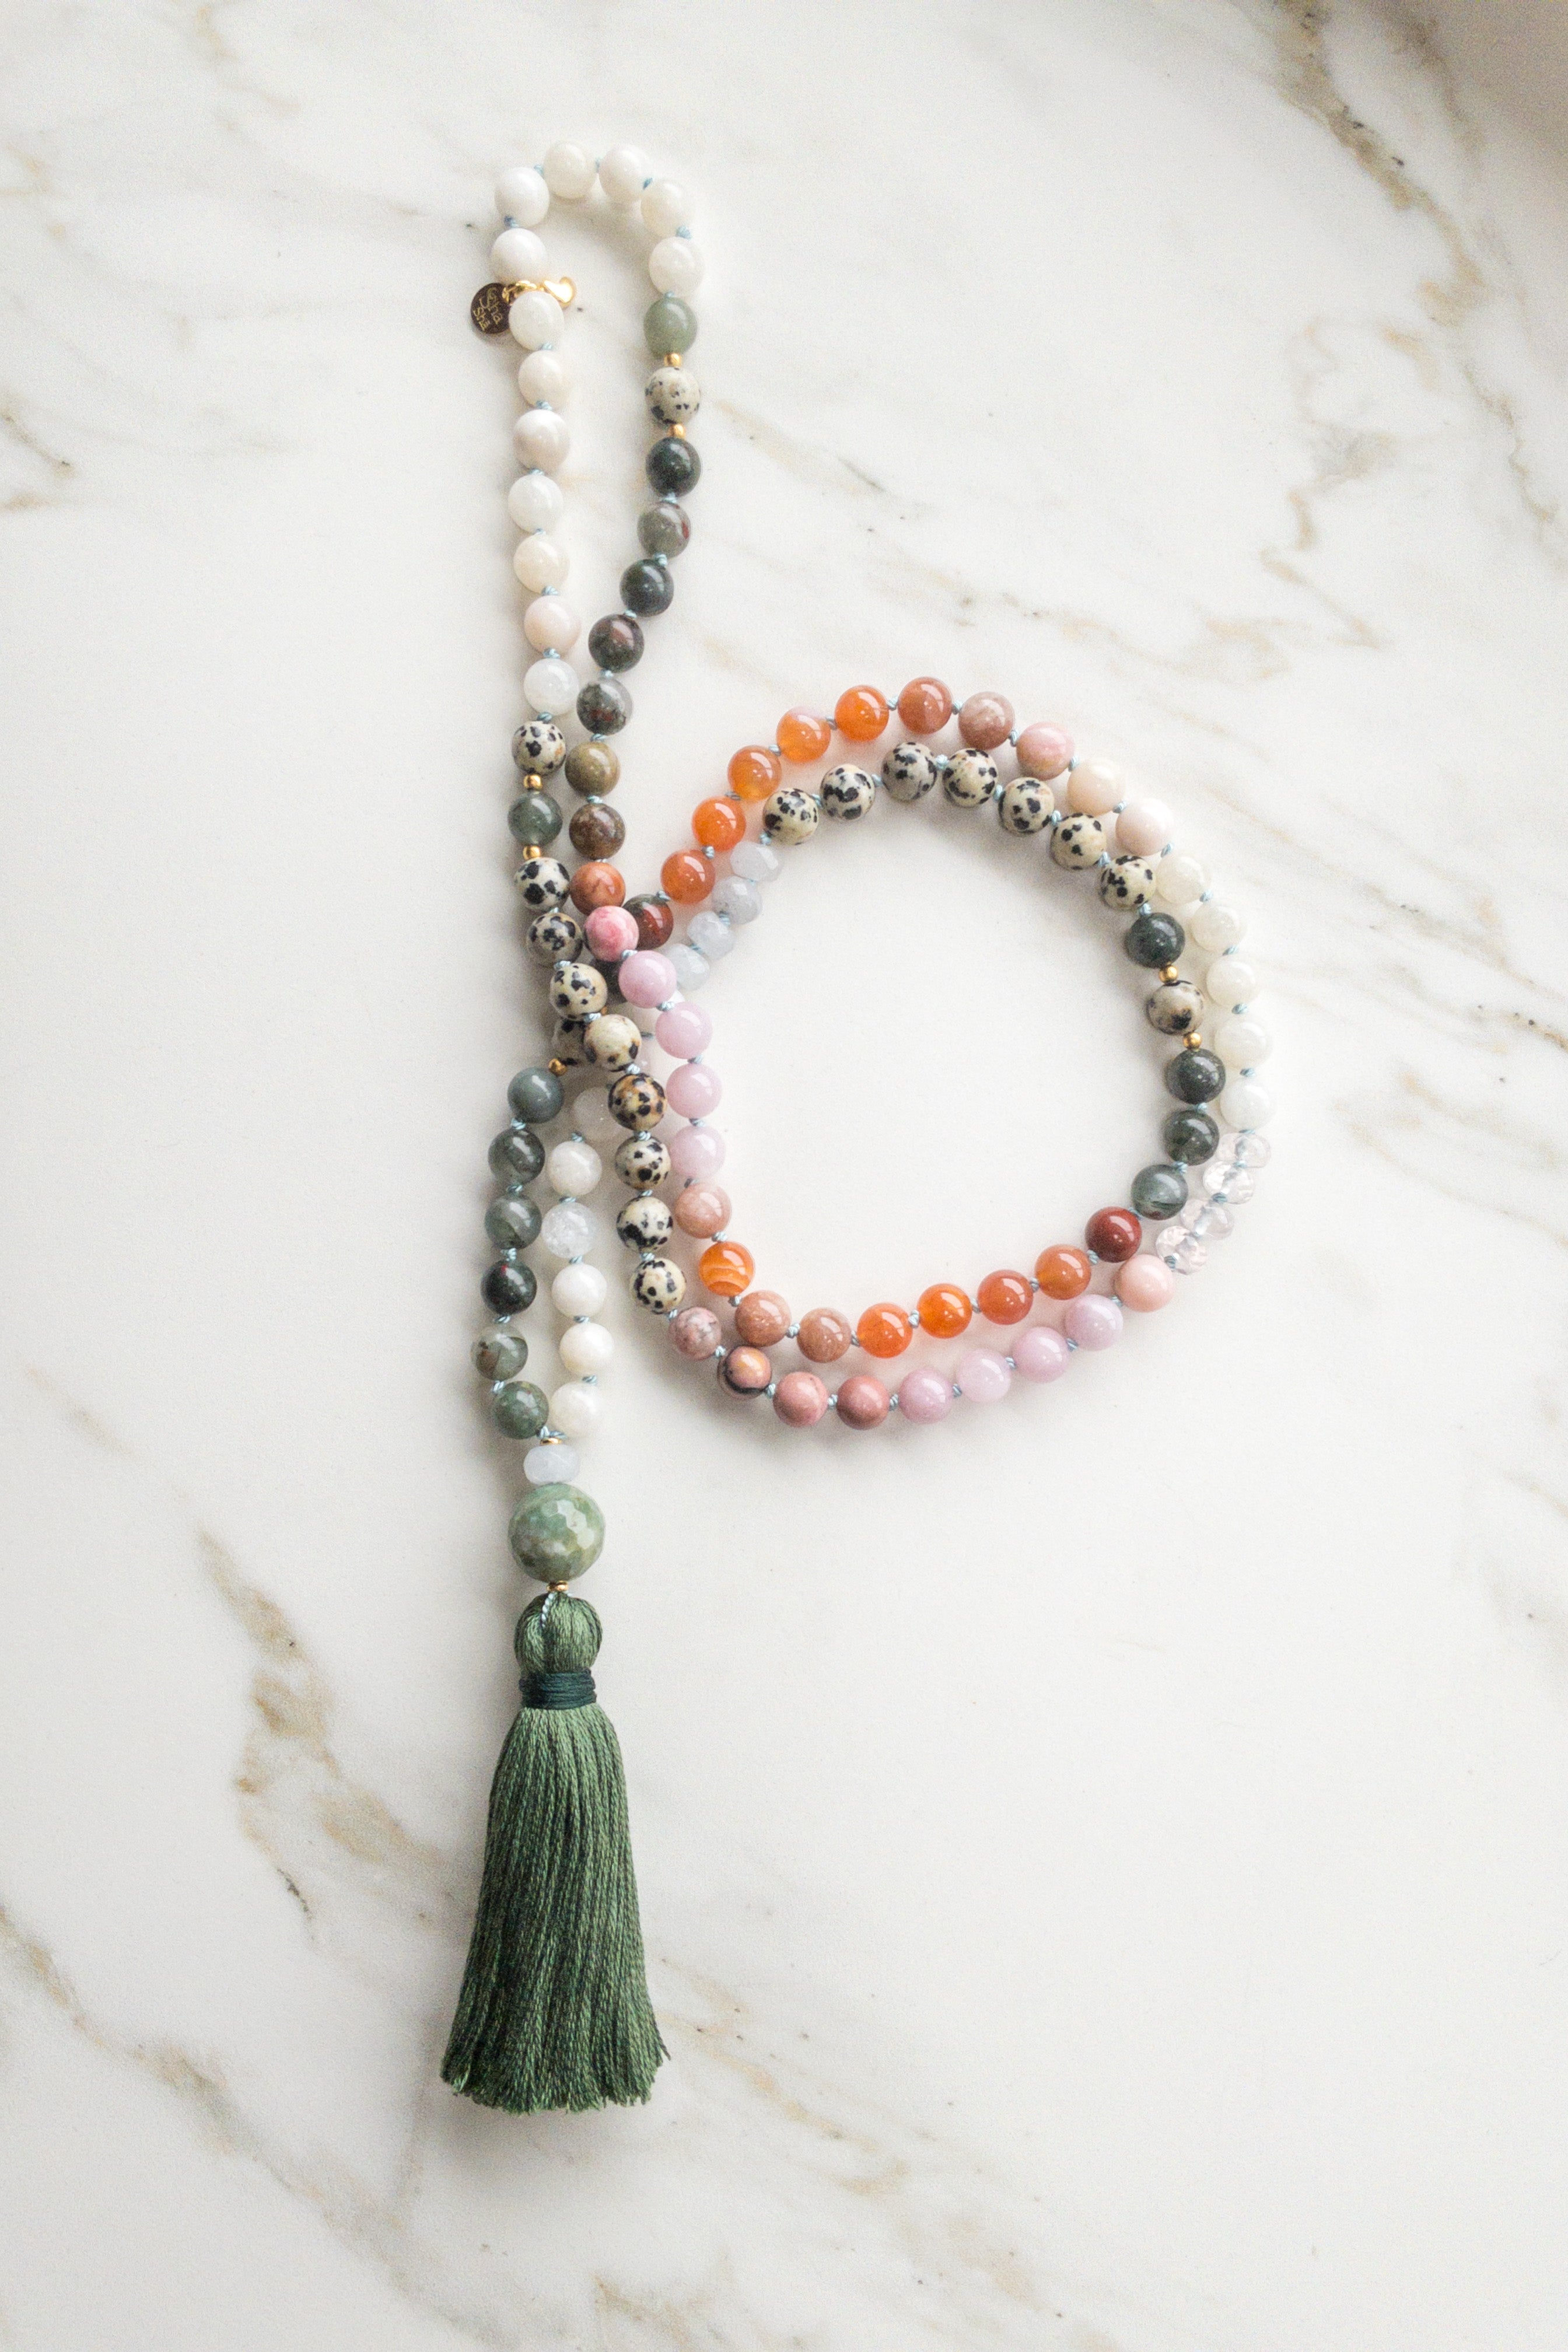 Elevation Cycle Mala 108 Beads - OceanEye - shashā yoga and meditation jewellery hand knotted in Switzerland 